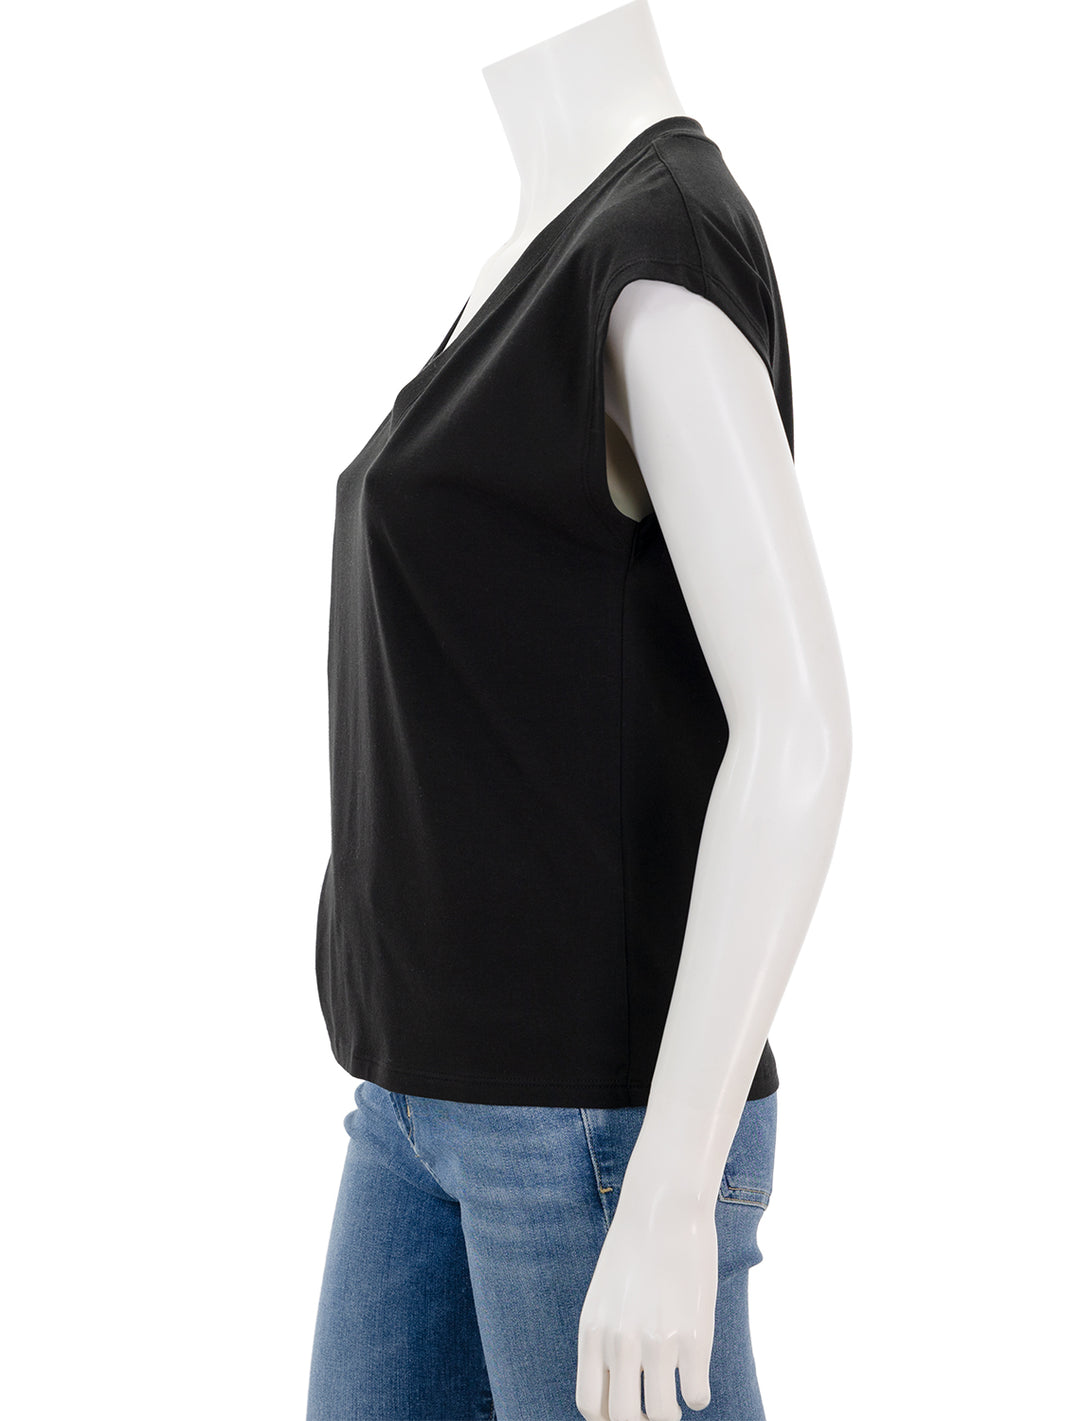 Side view of Patrick Assaraf's iconic vneck dolman tee in black.